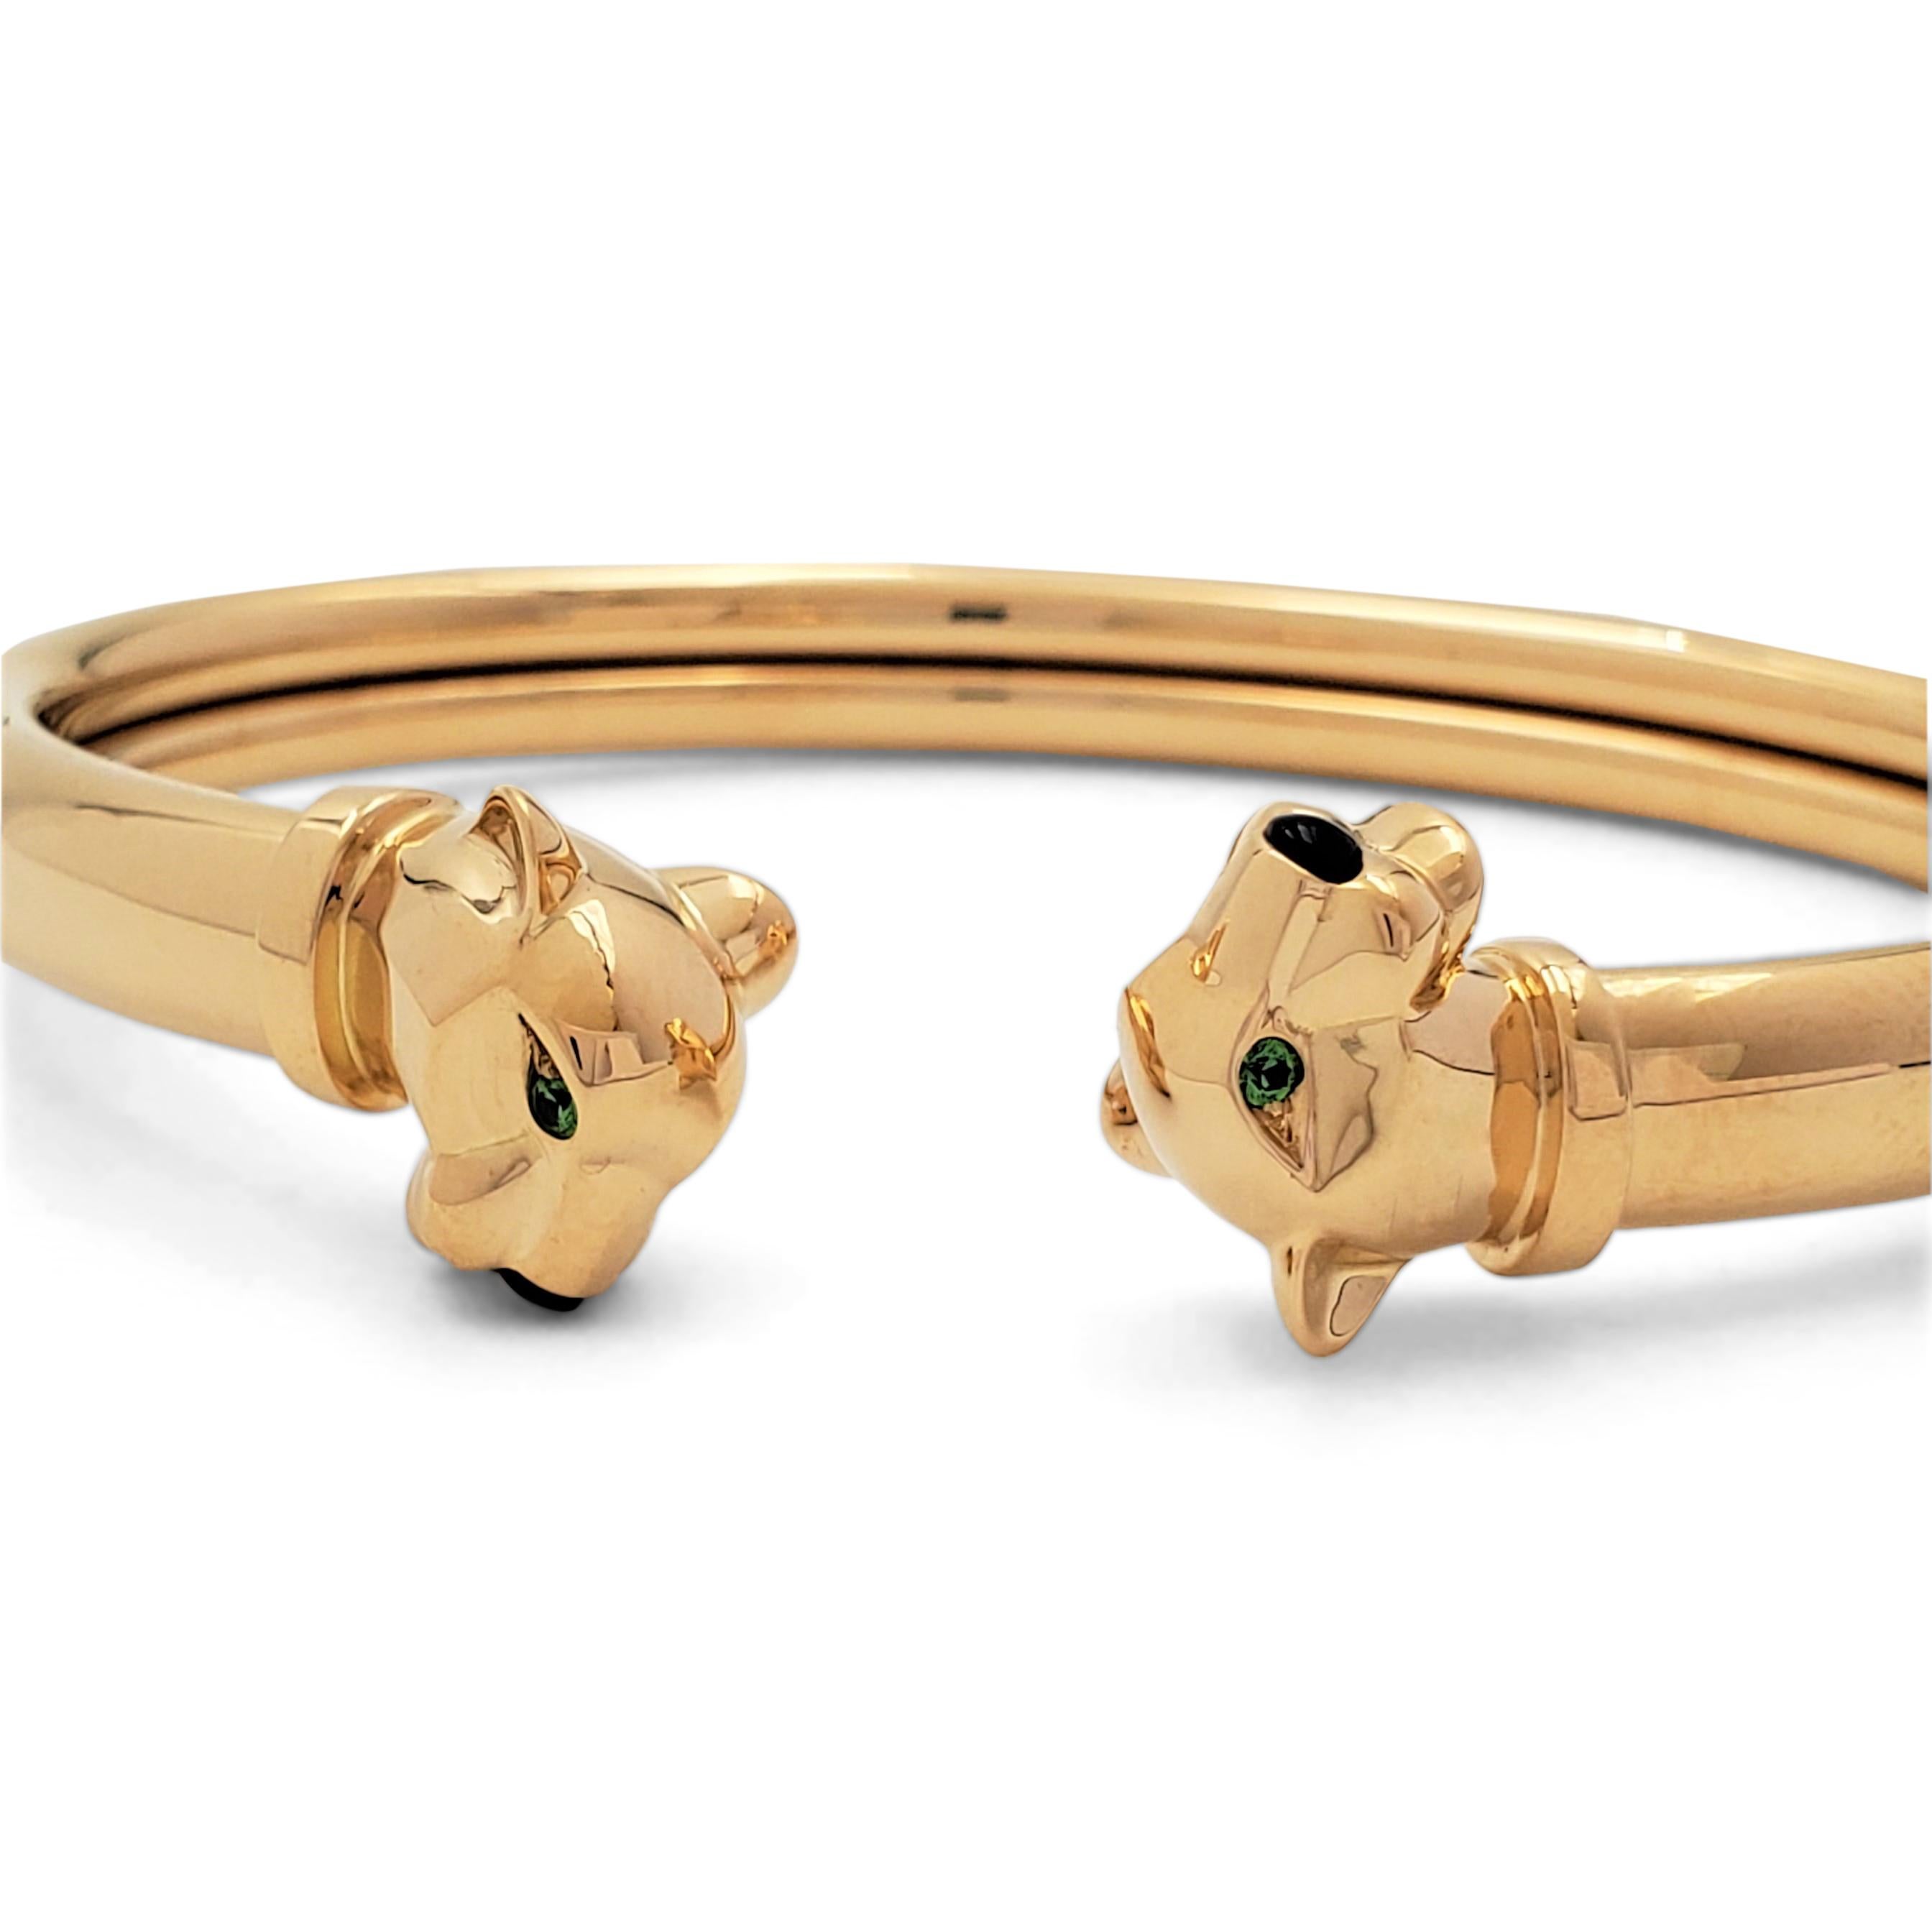 Authentic Cartier Panthère de Cartier bracelet crafted in 18 karat yellow gold. Each panther head is set with lively tsavorite garnet eyes and an onyx nose. Signed Cartier, 16, Au750, with serial number. The bracelet is presented with the original